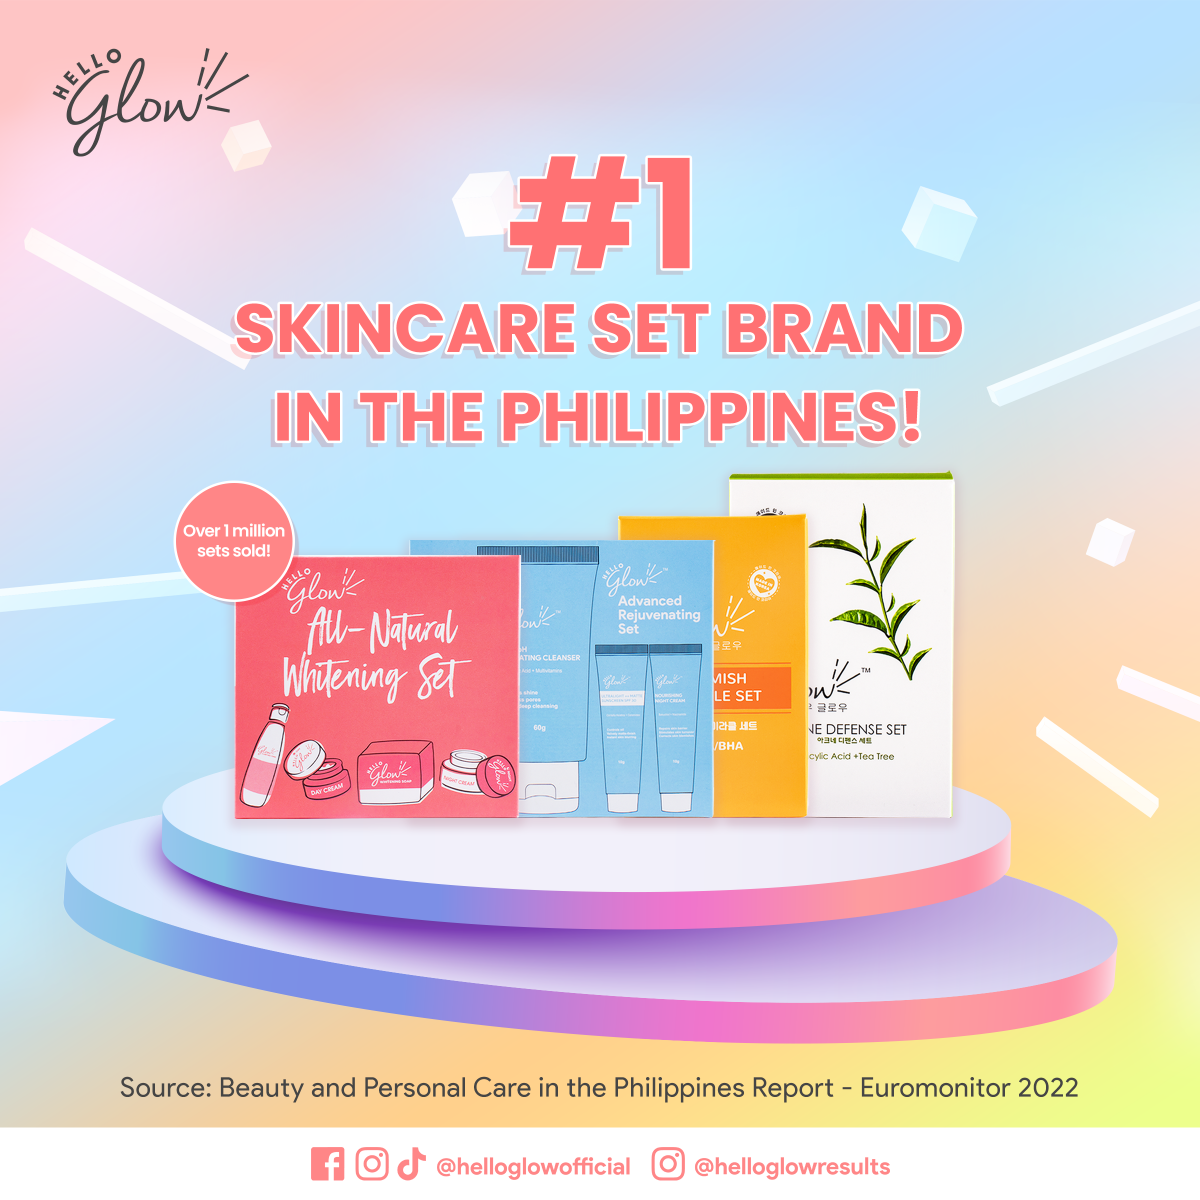 Hello Glow is the #1 skin care set brand in the Philippines